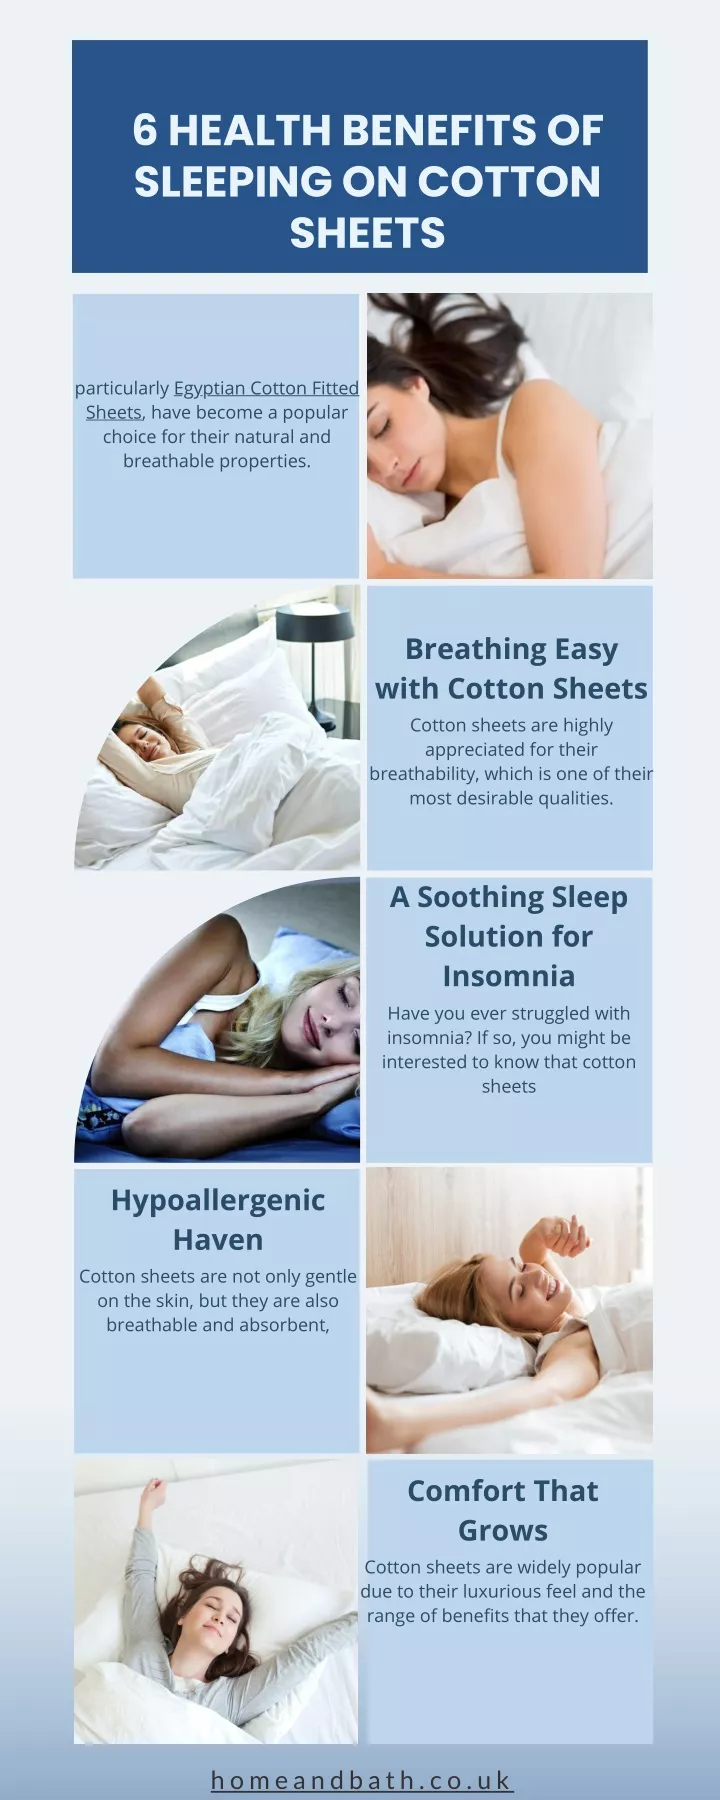 6 health benefits of sleeping on cotton sheets